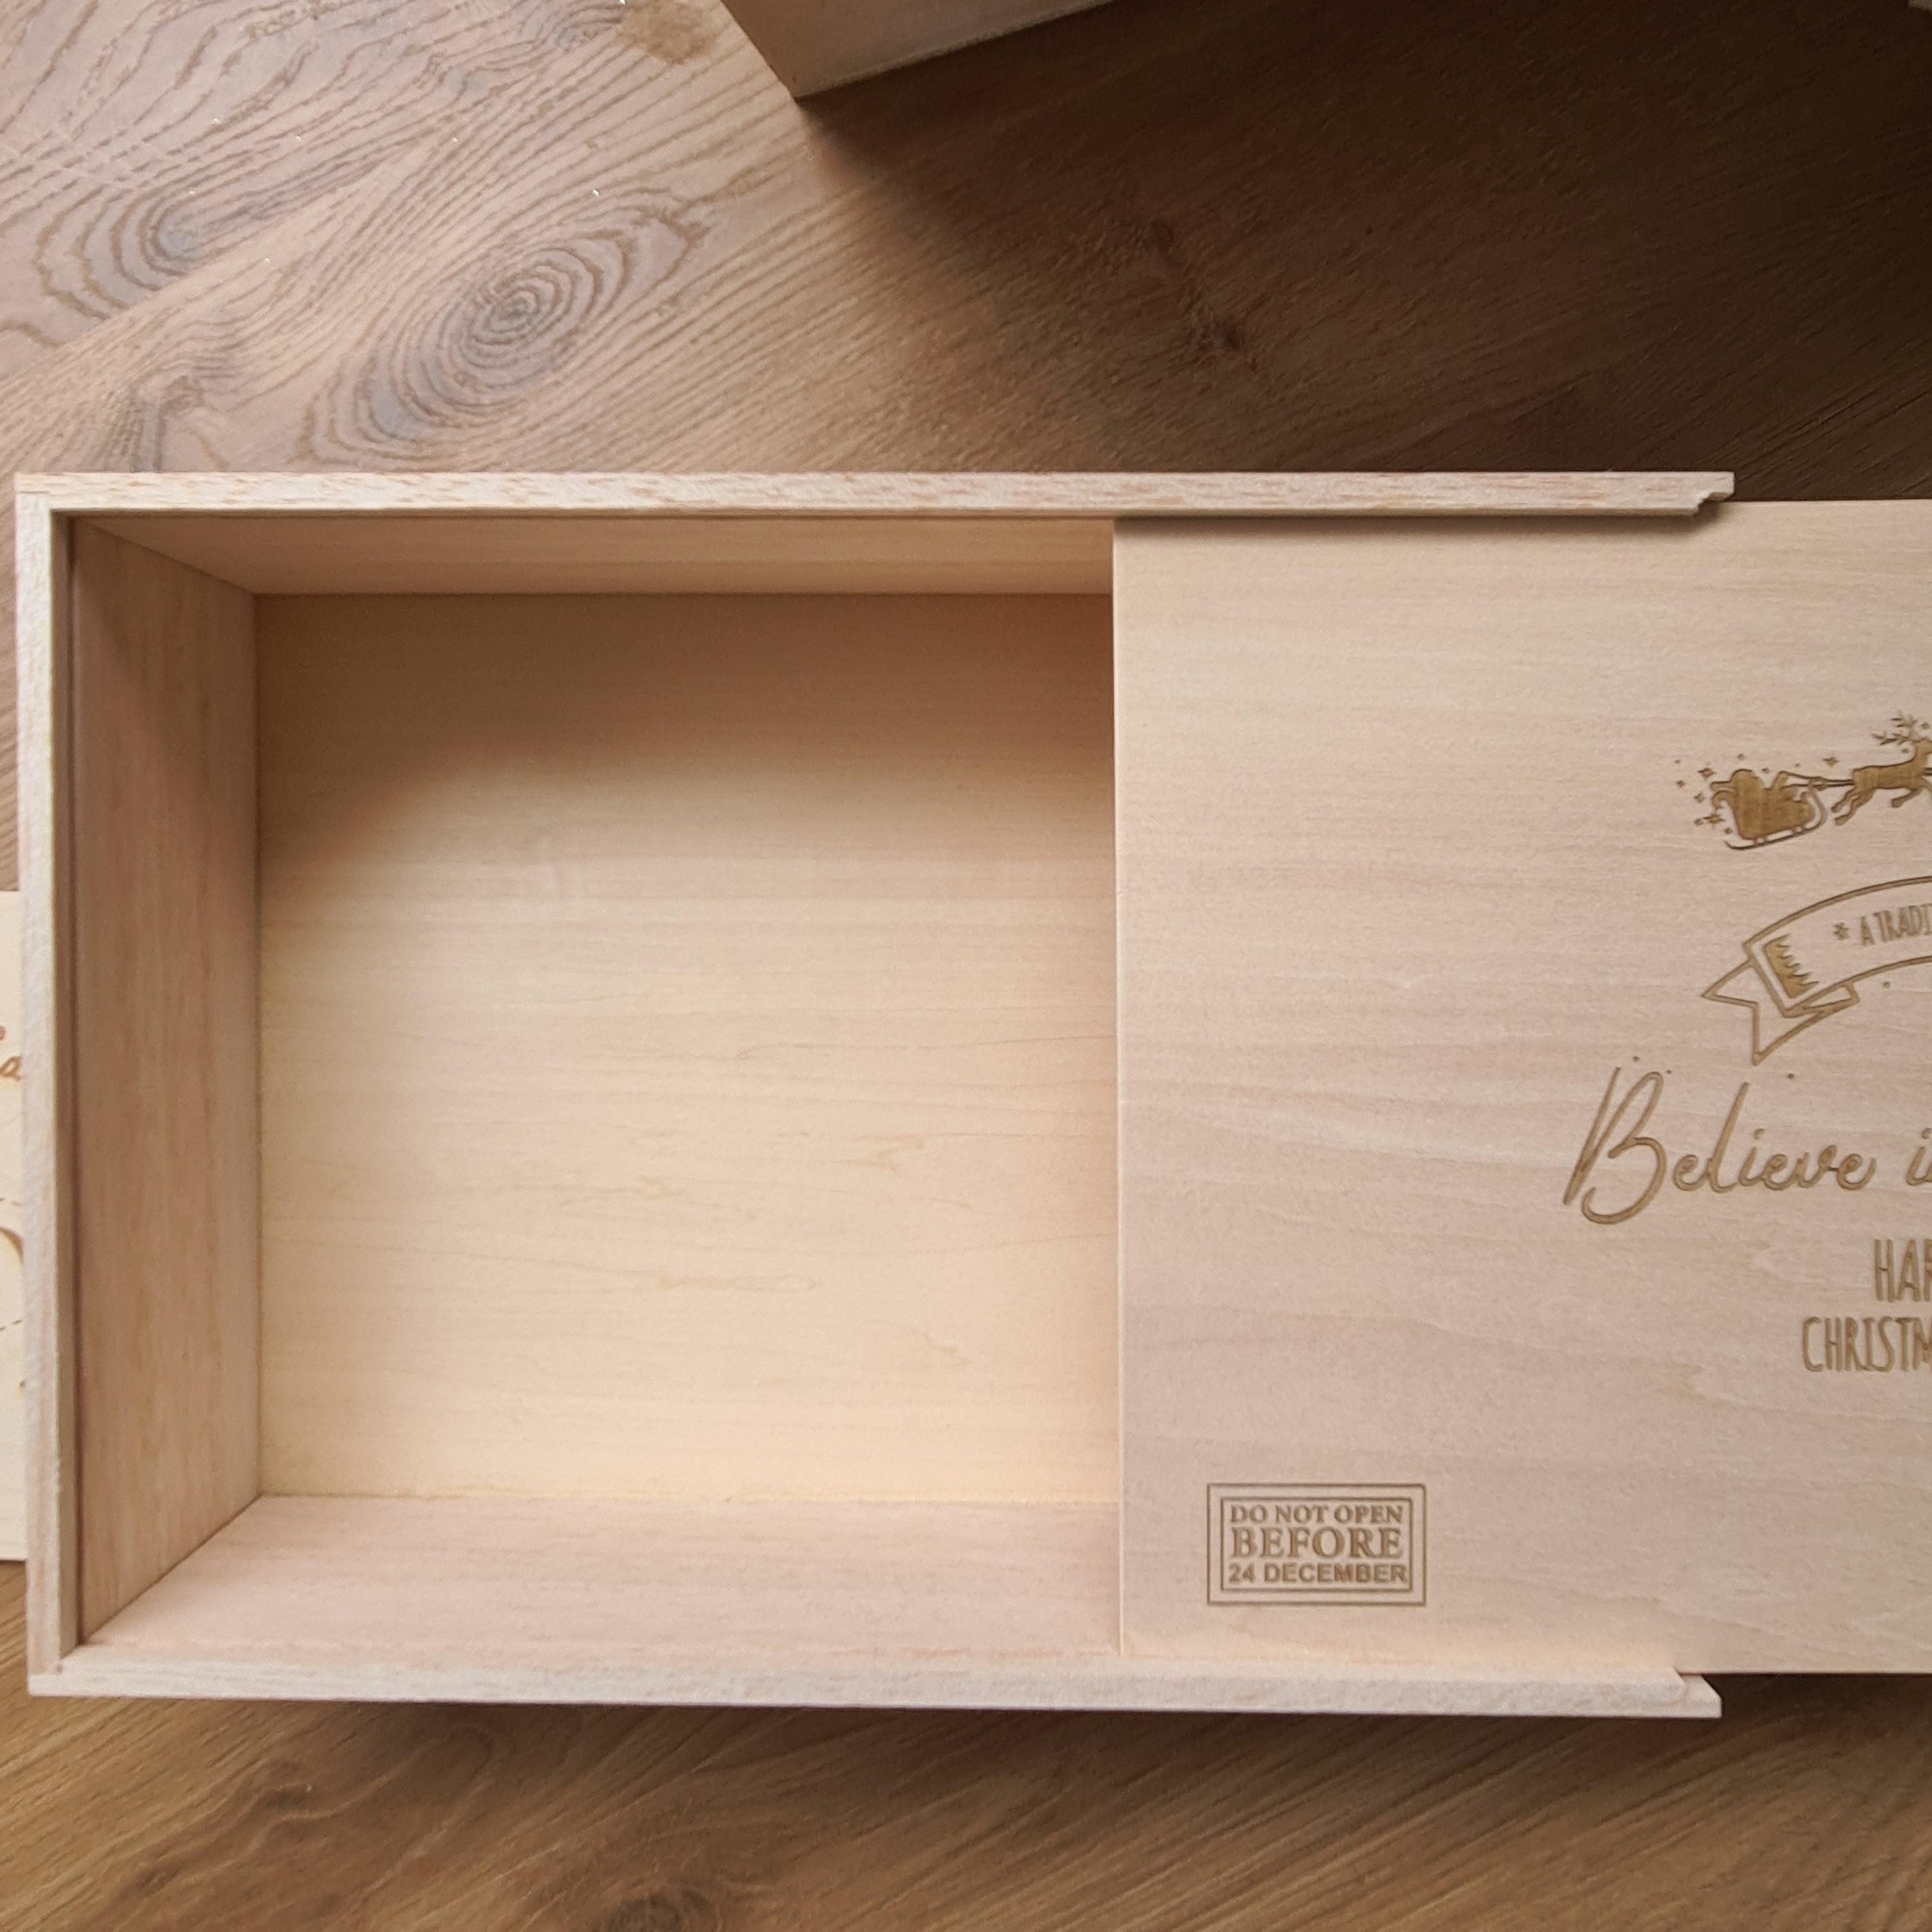 Personalised Christmas Keepsake Box - Search the Skies (Bold) - The Willow Corner